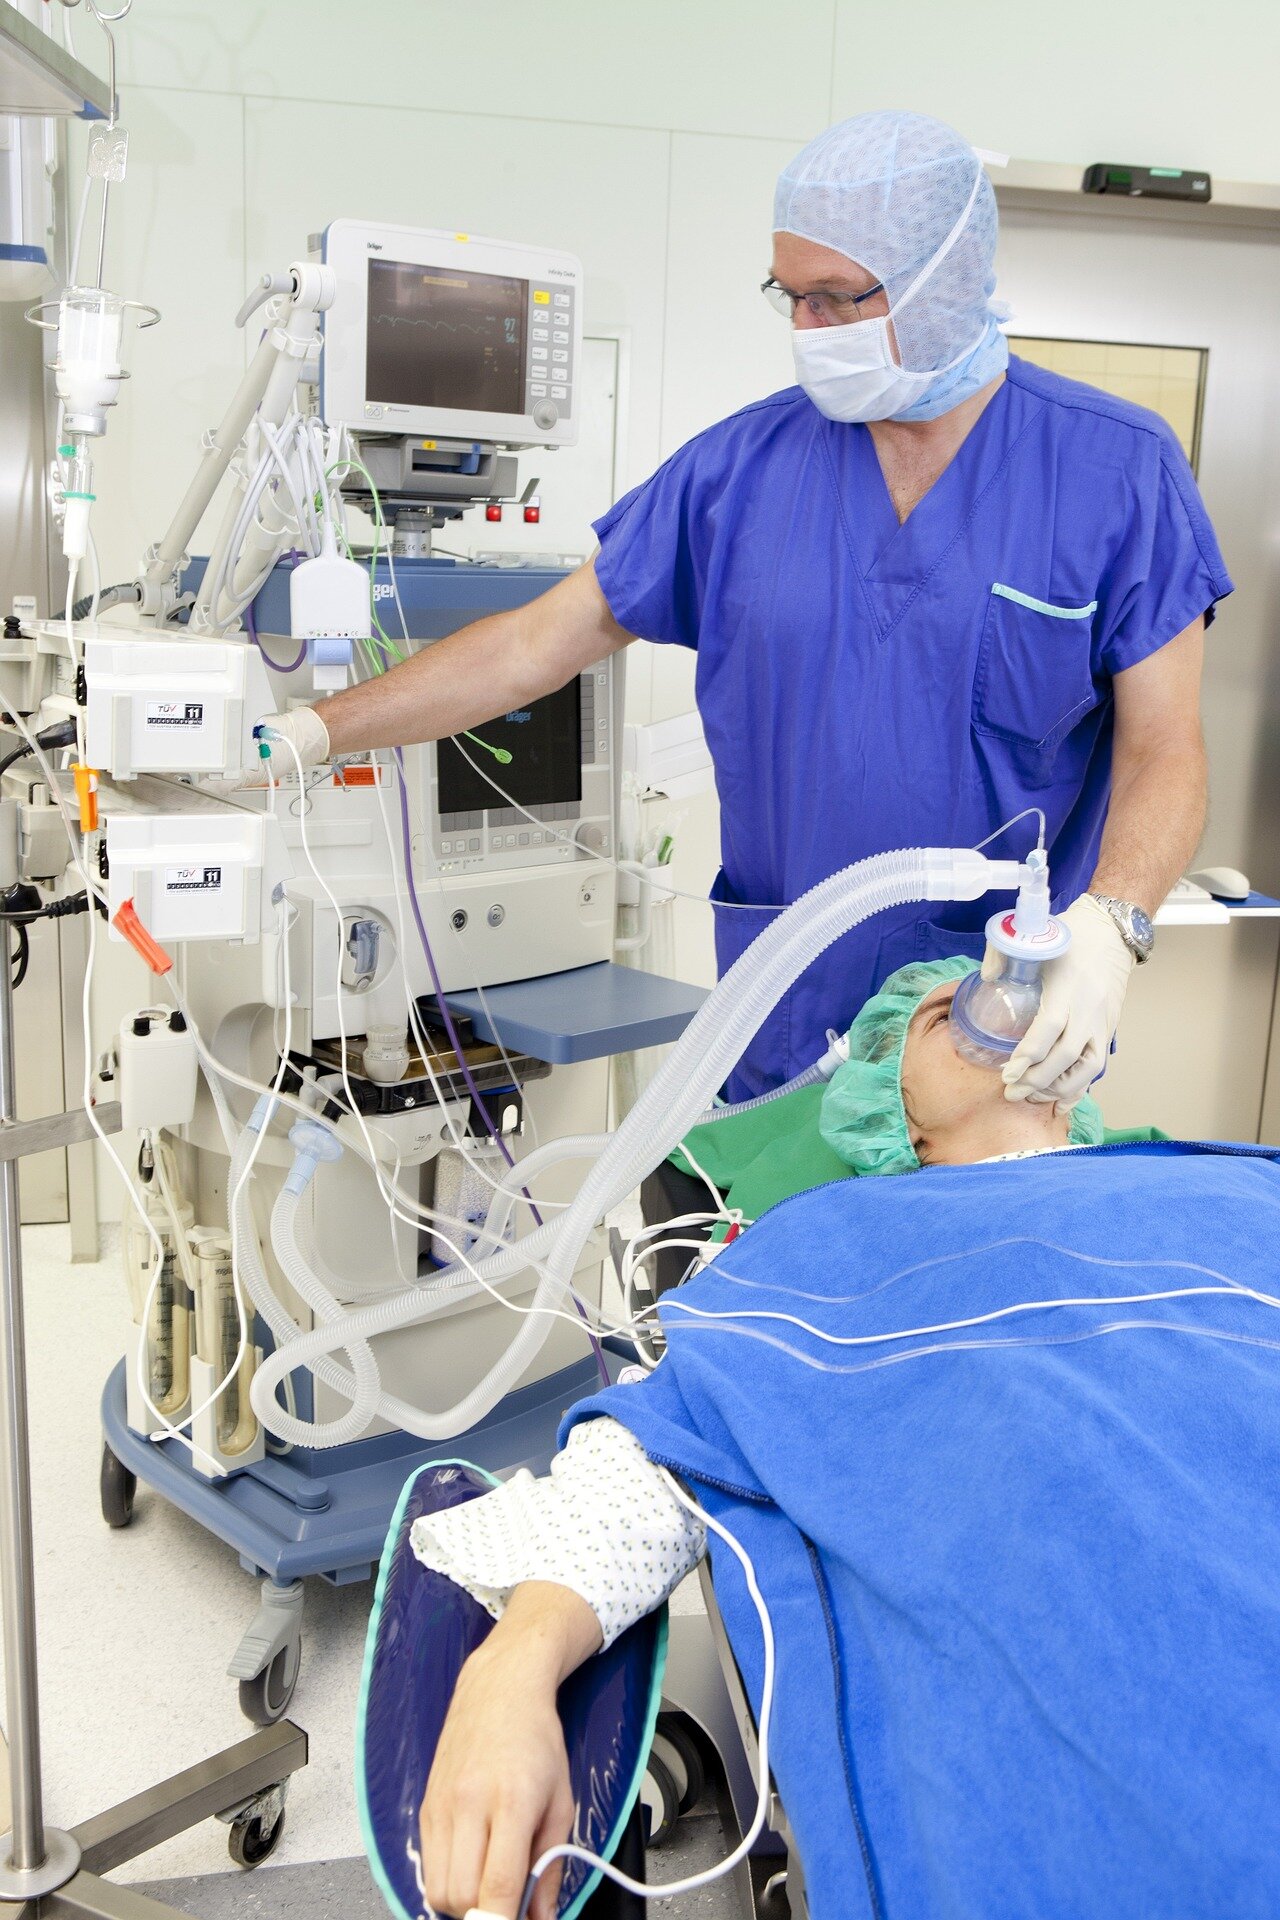 UK analysis shows that 3 in 10,000 patients experience cardiac arrest requiring resuscitation during anesthesia